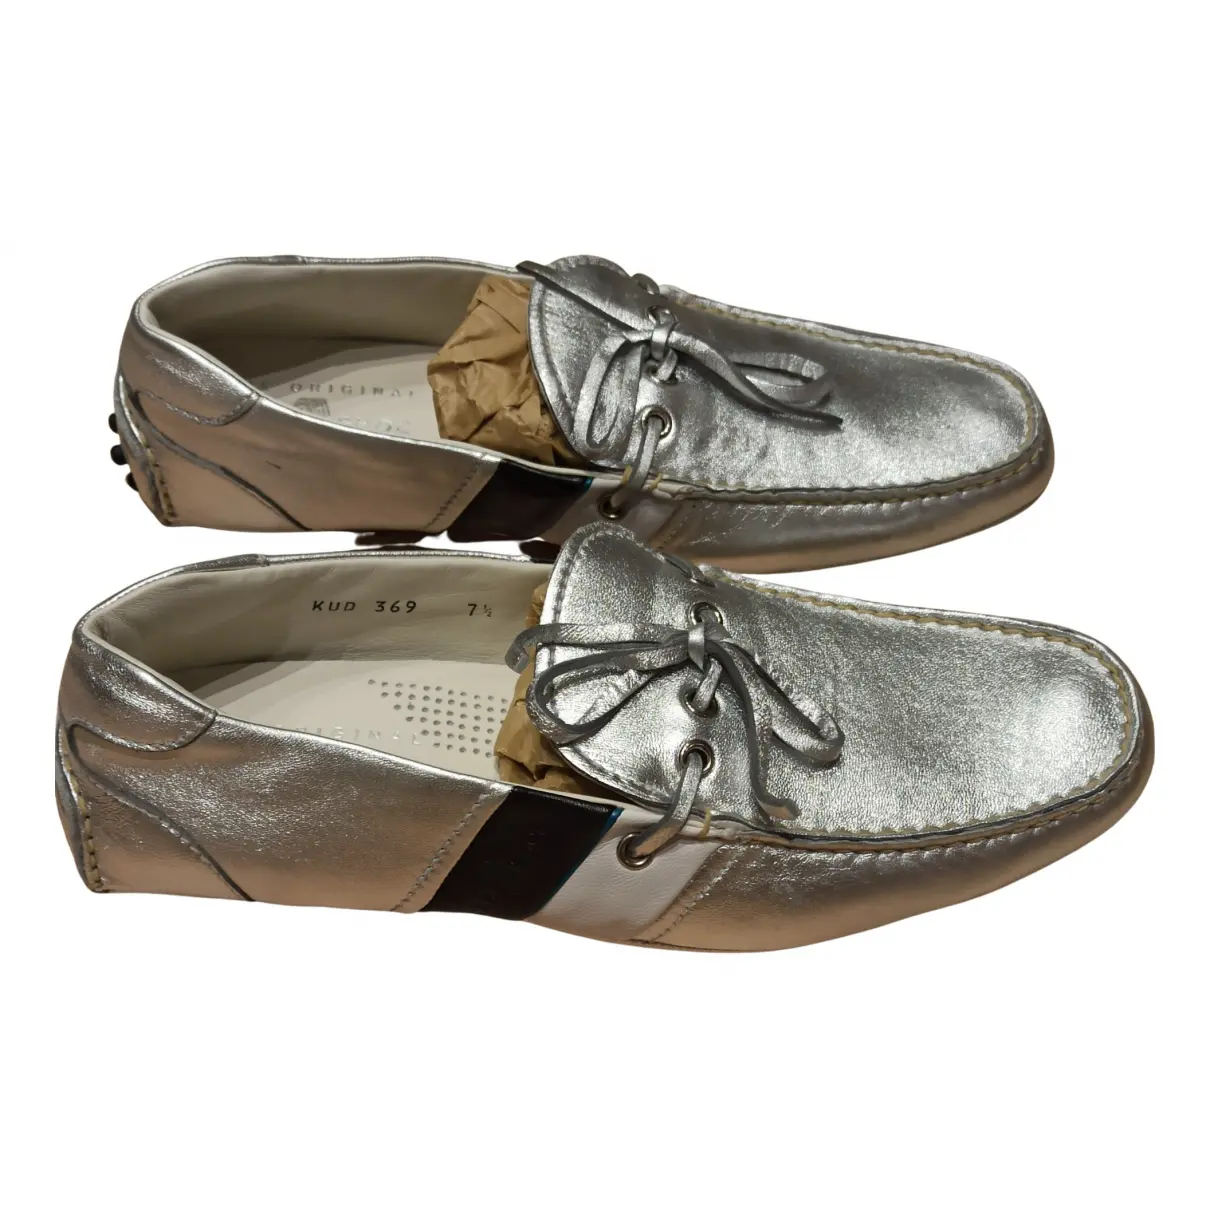 Buy Carshoe Leather flats online